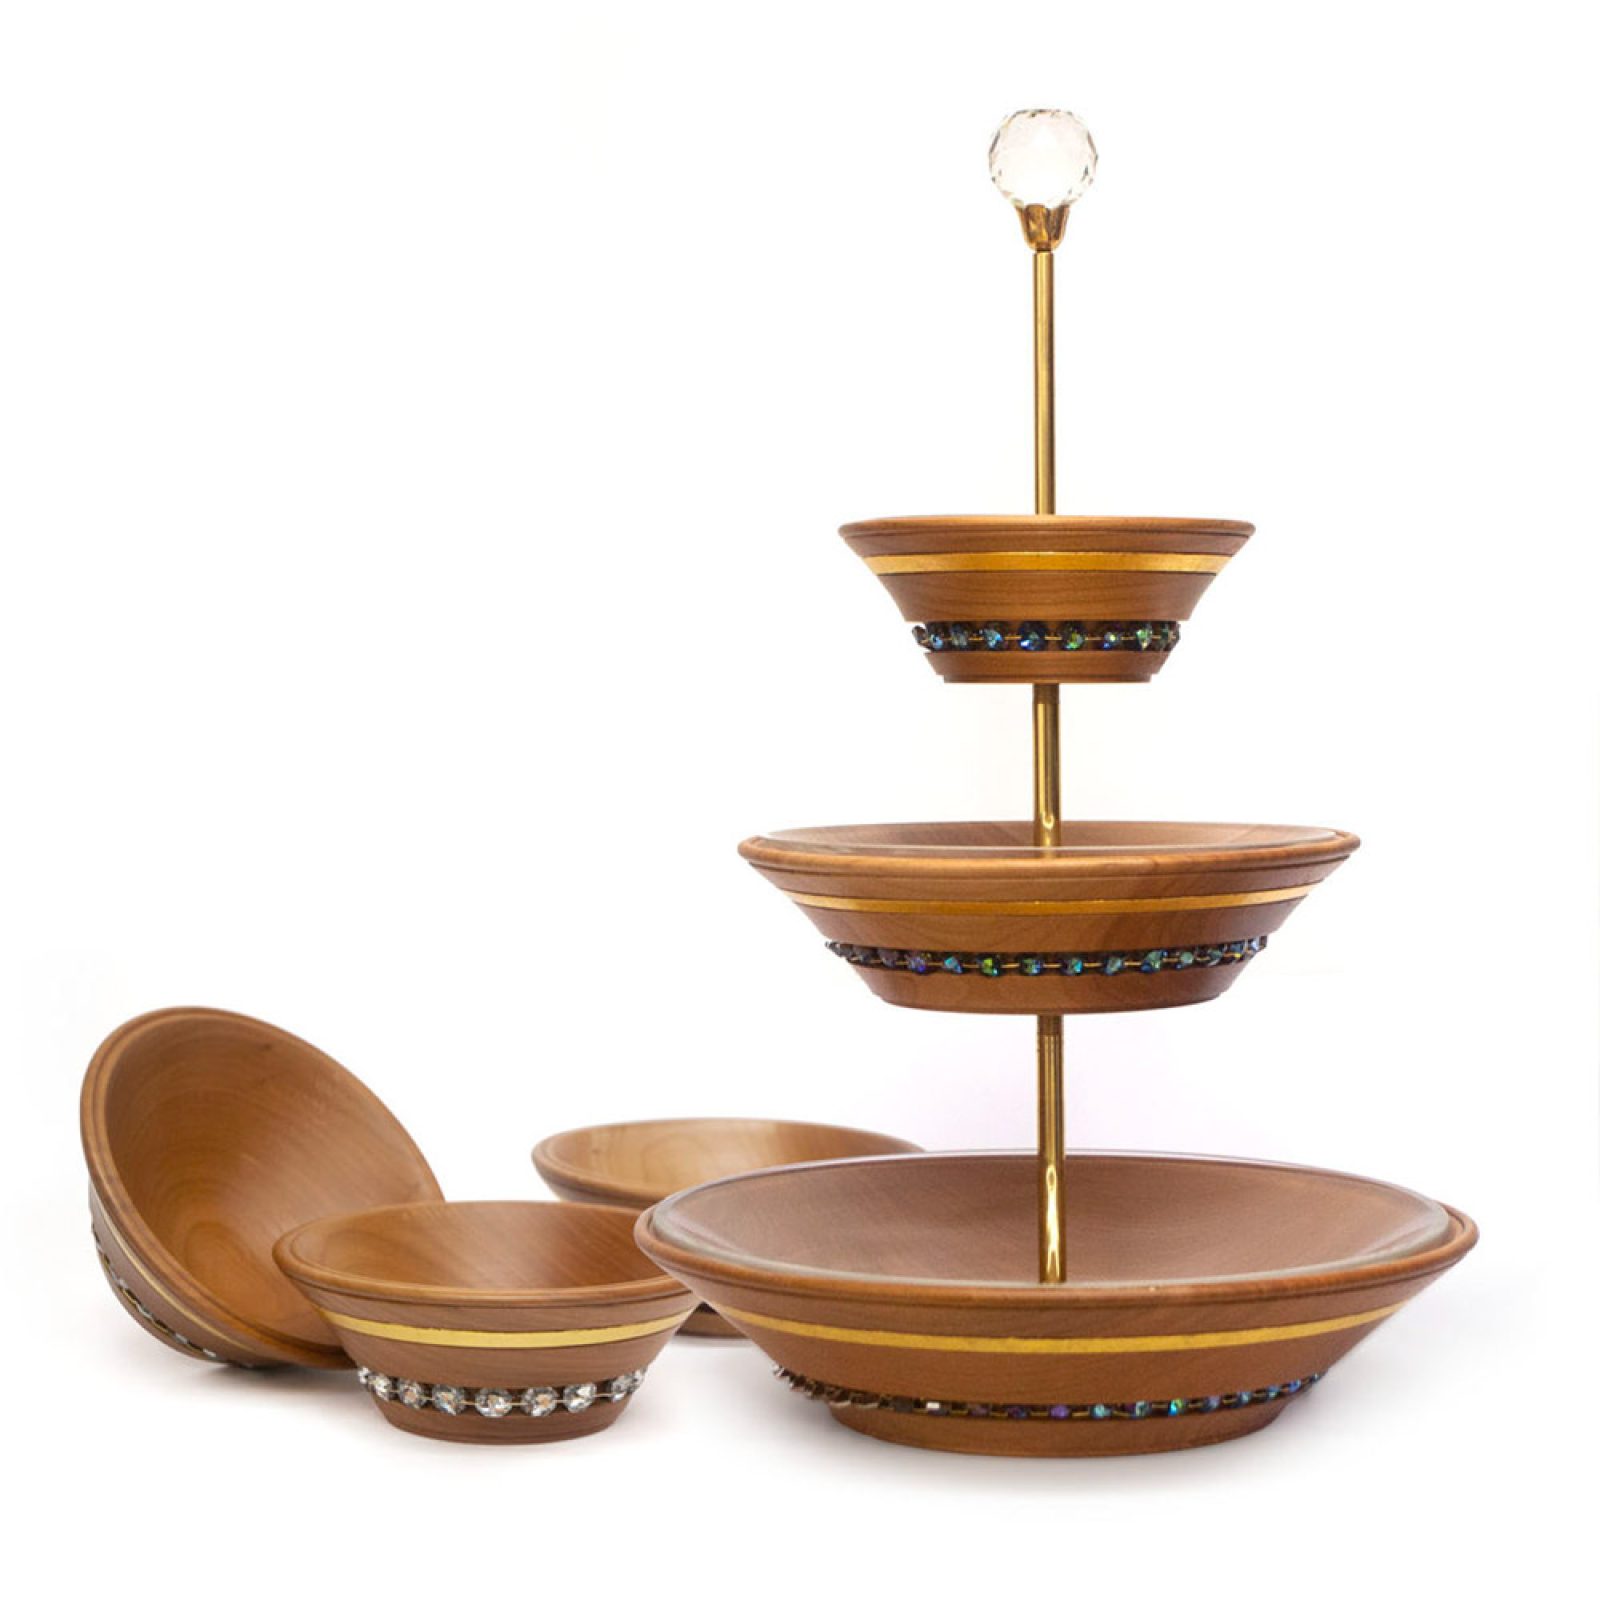 Kasida Oase - Hand crafted from cherry wood | Natalis Luxus